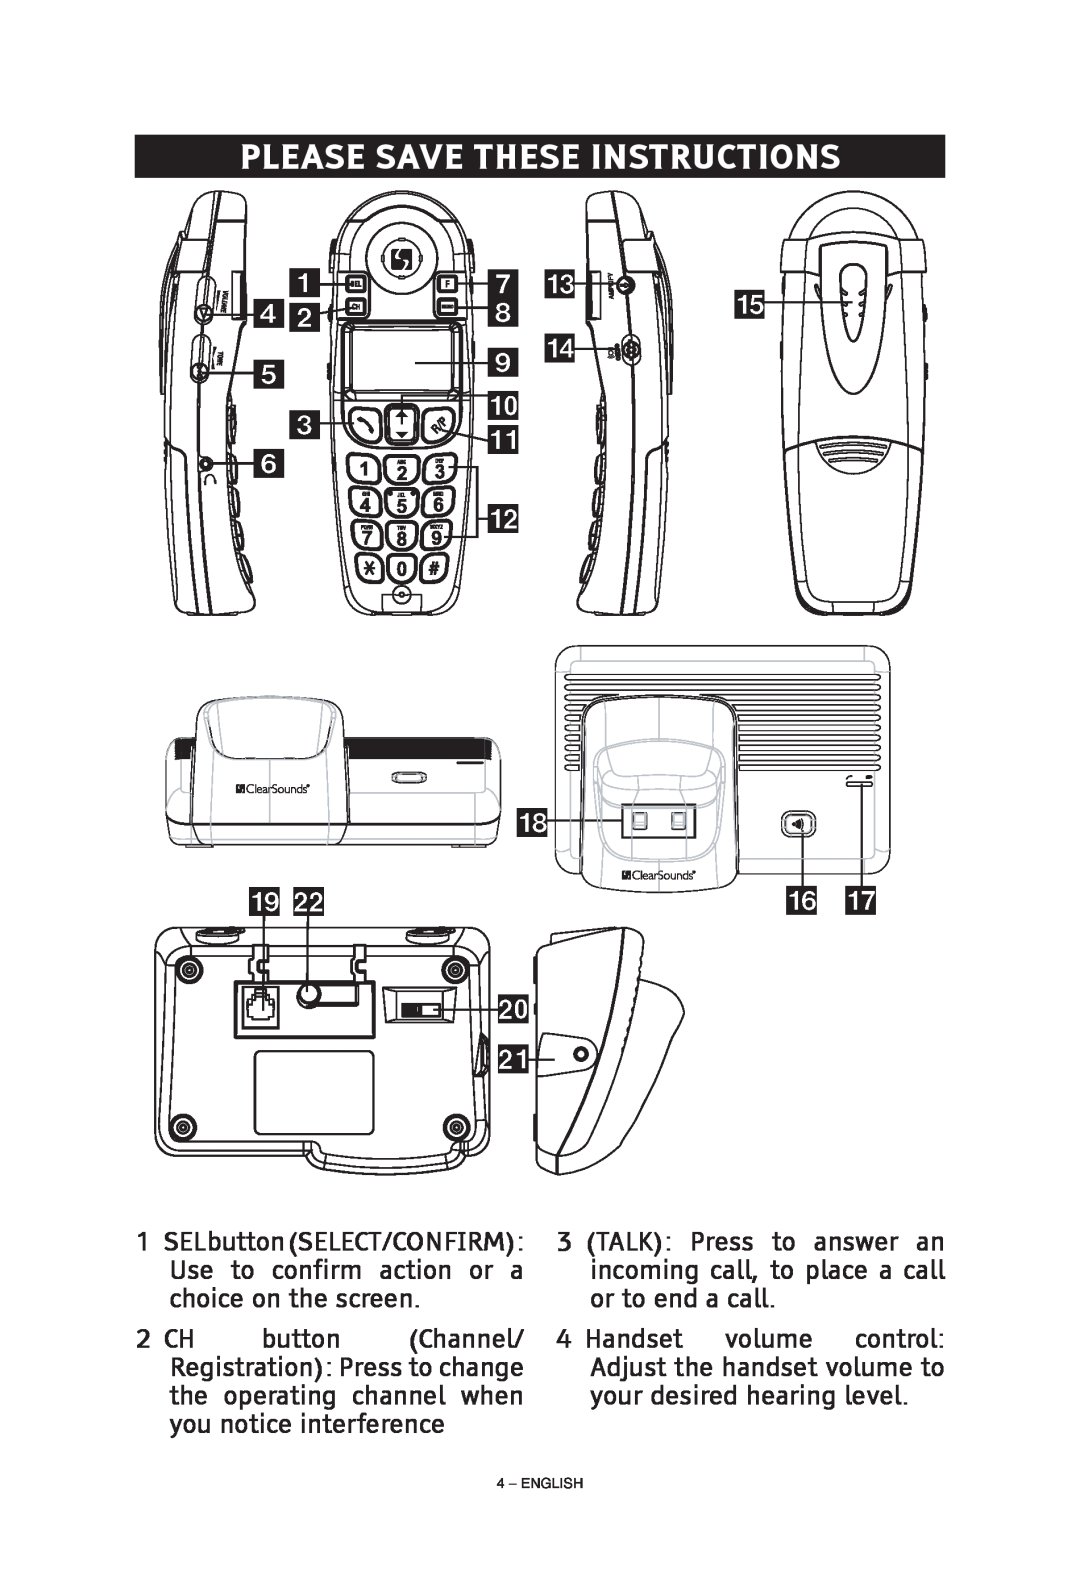 ClearSounds CS-A55 manual Please Save These Instructions 